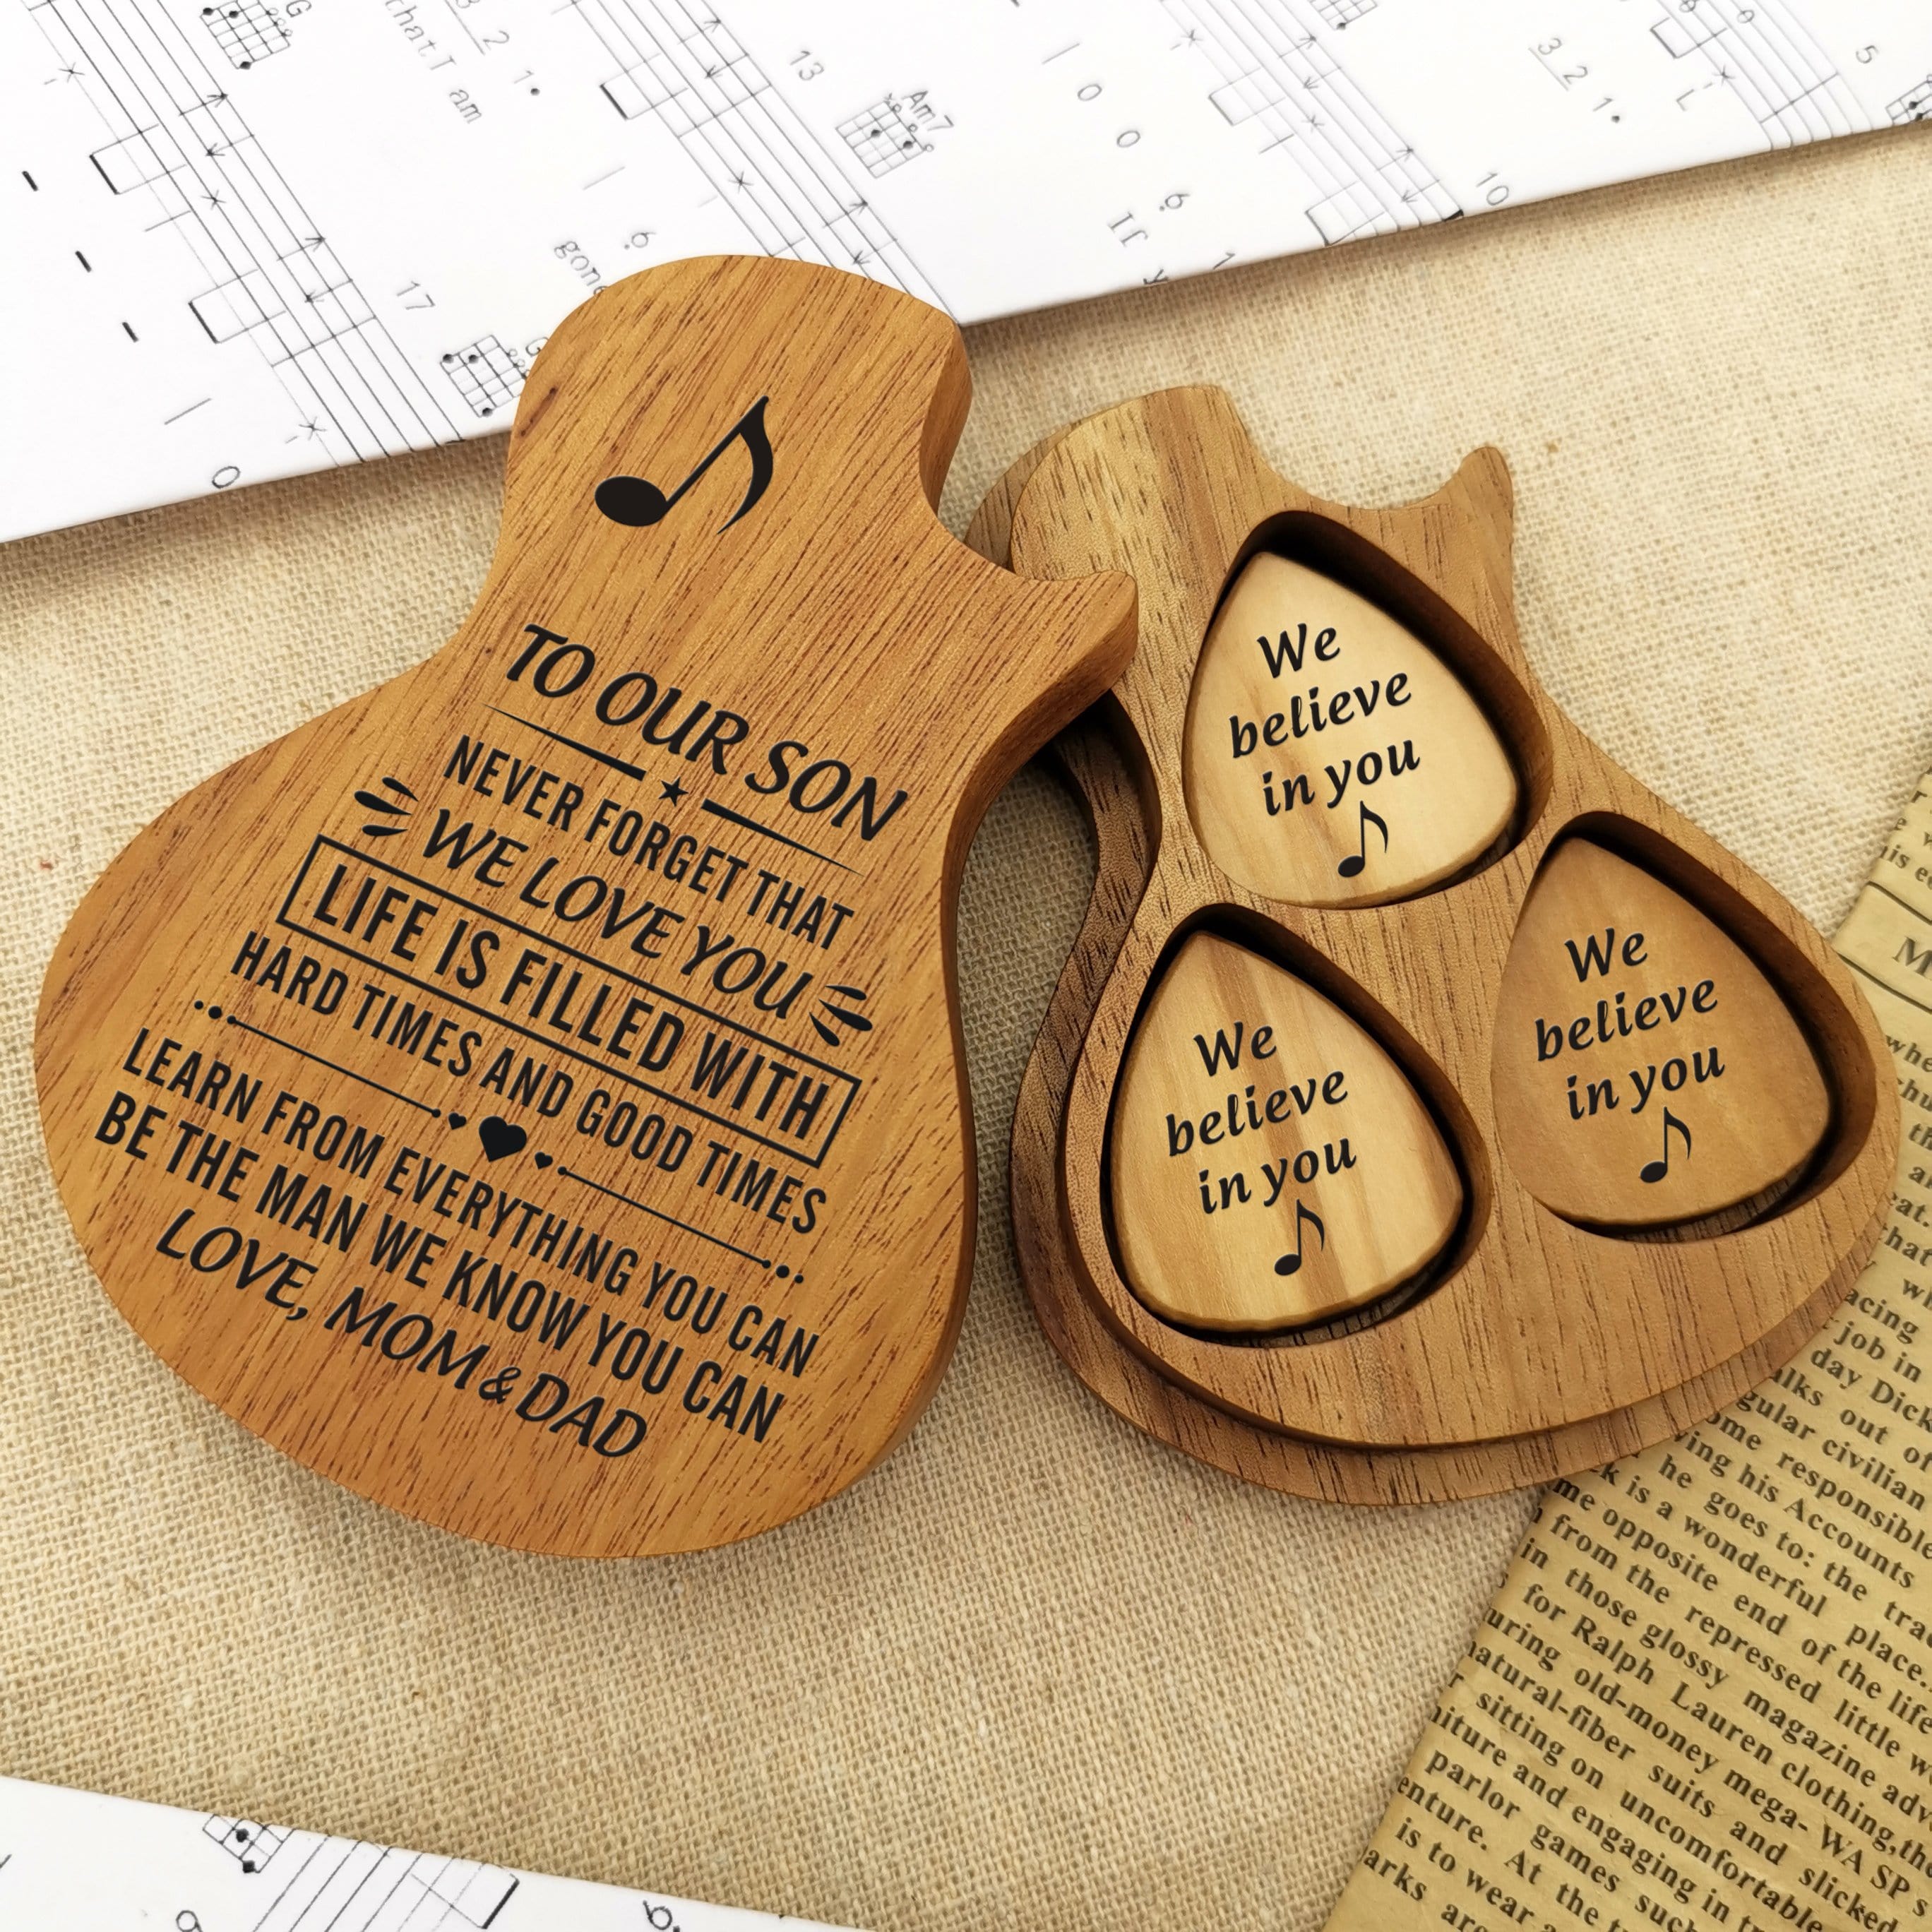 Guitar Picks To Our Son - I Love You Wood Guitar Picks With Case GiveMe-Gifts